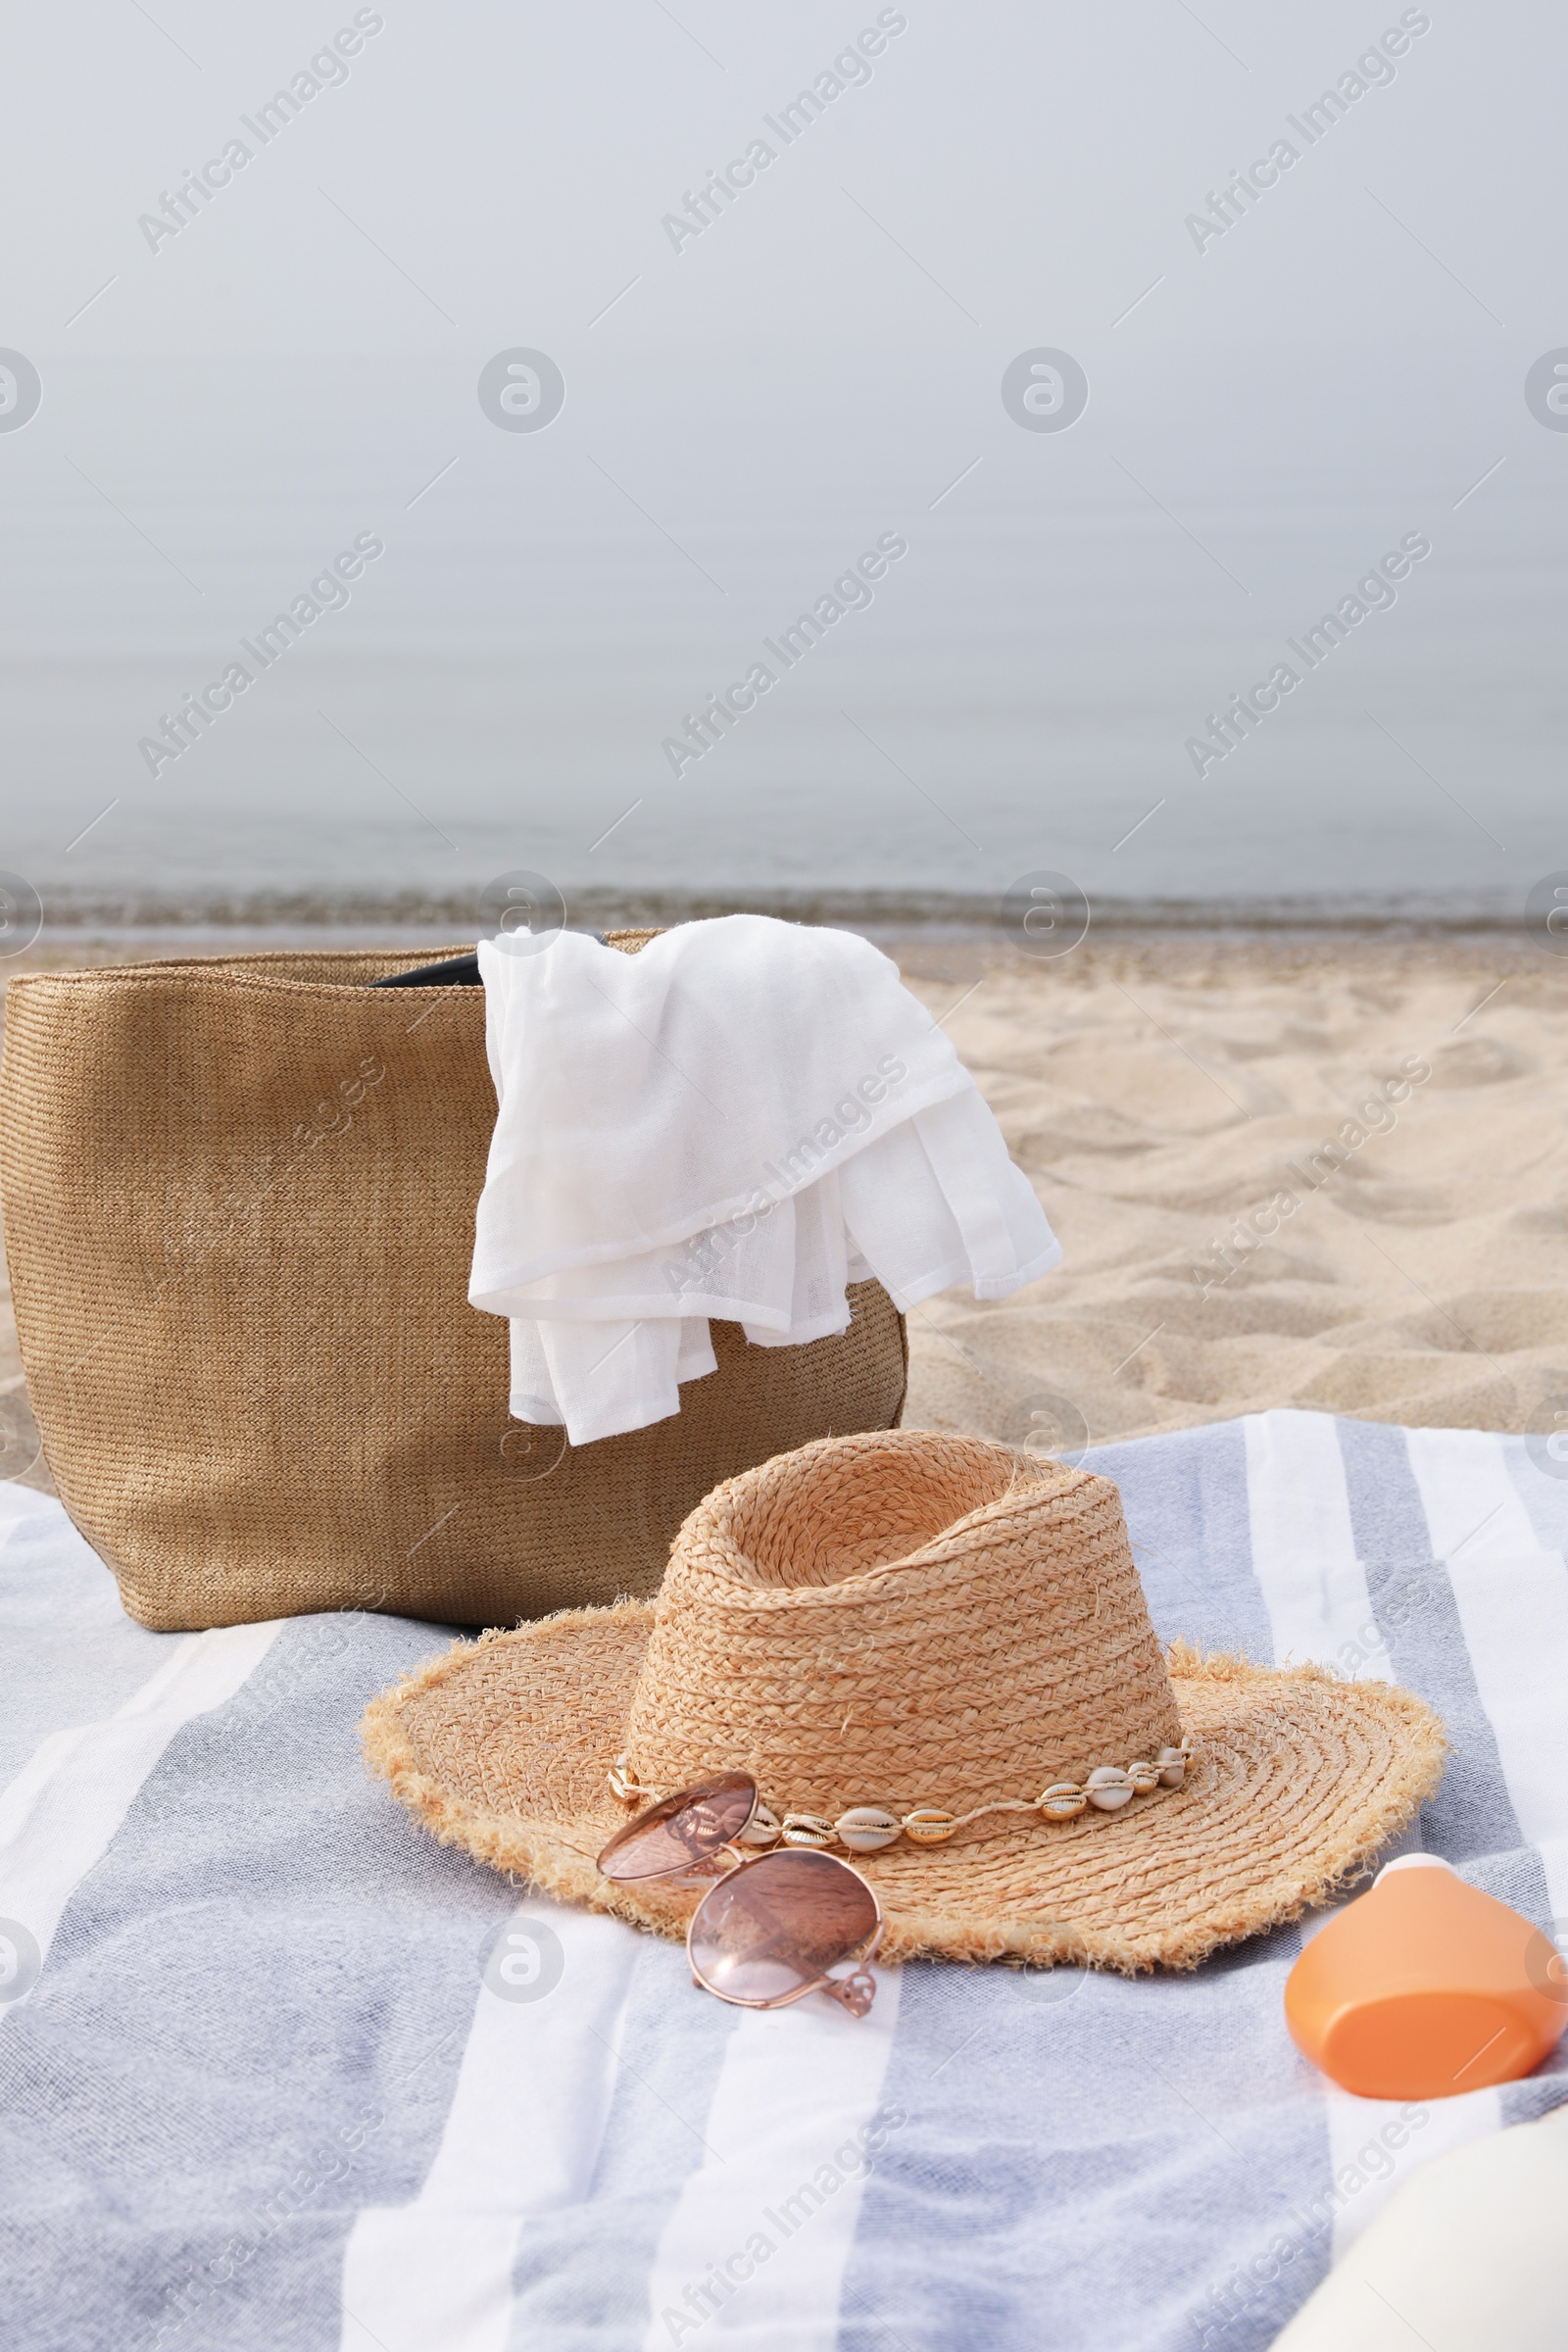 Photo of Bag and other beach items on sandy seashore